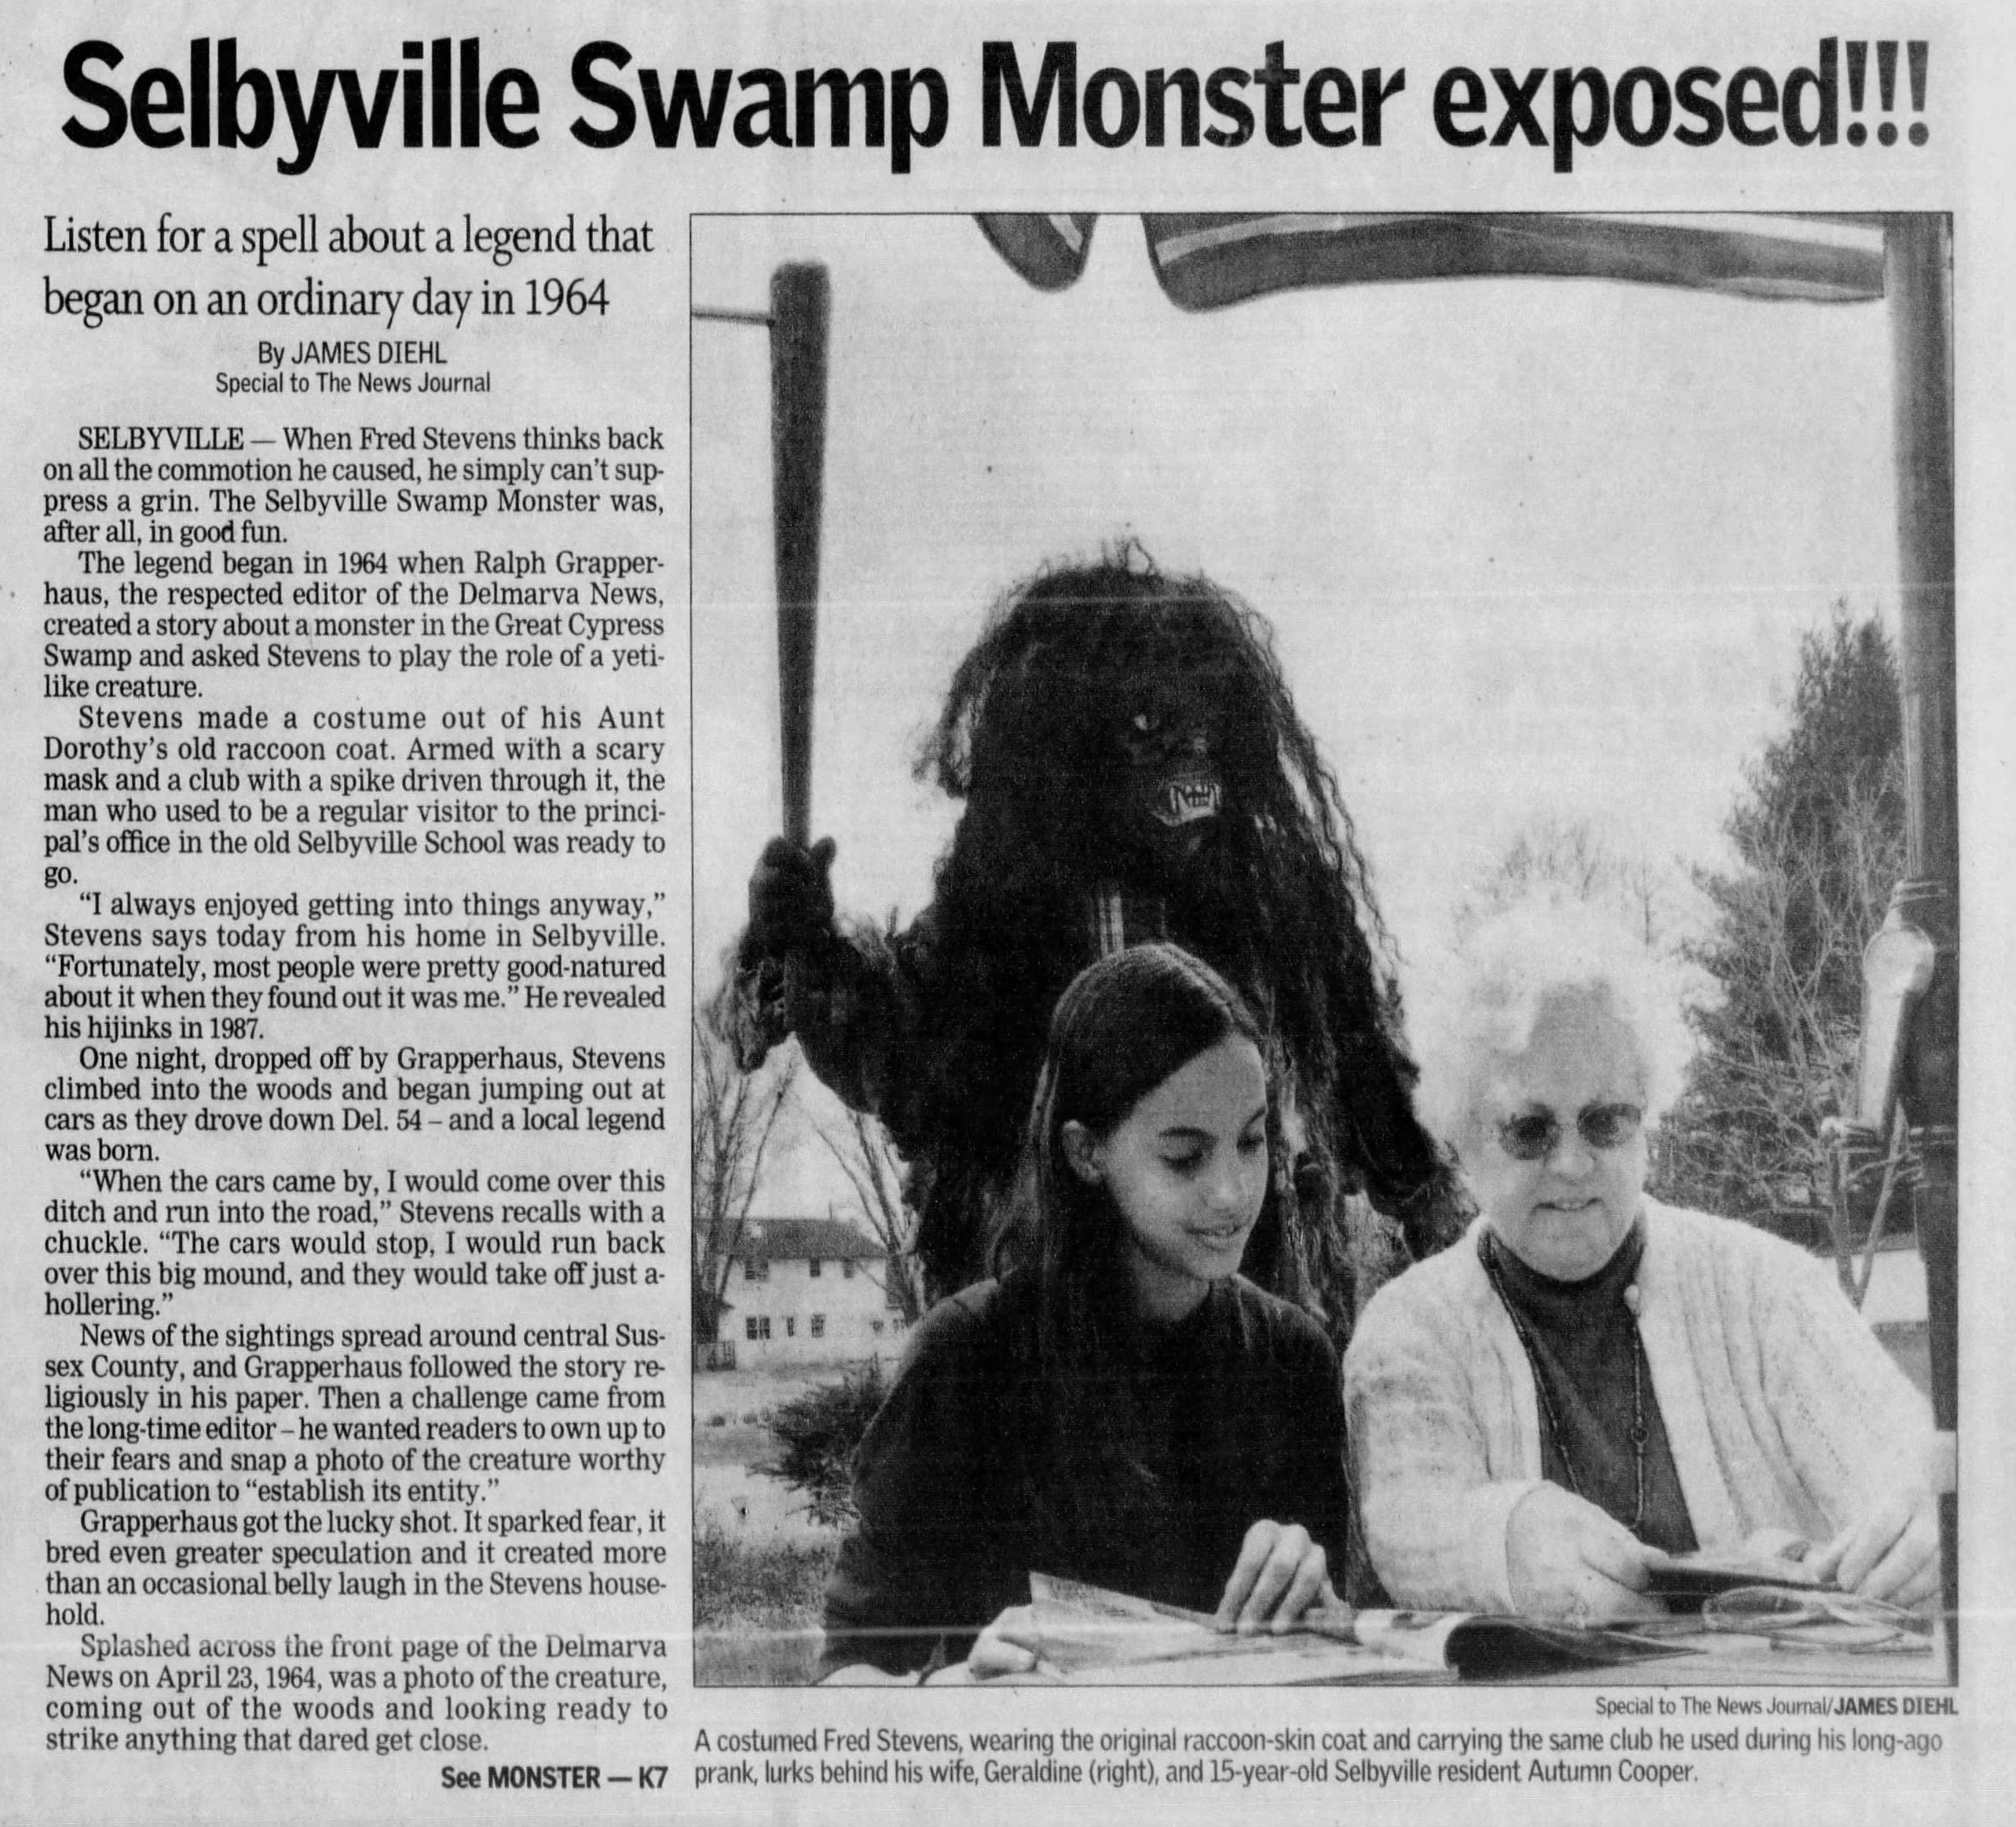 Delaware swamp has folks talking about its weird folklore with monsters, slaves, and more